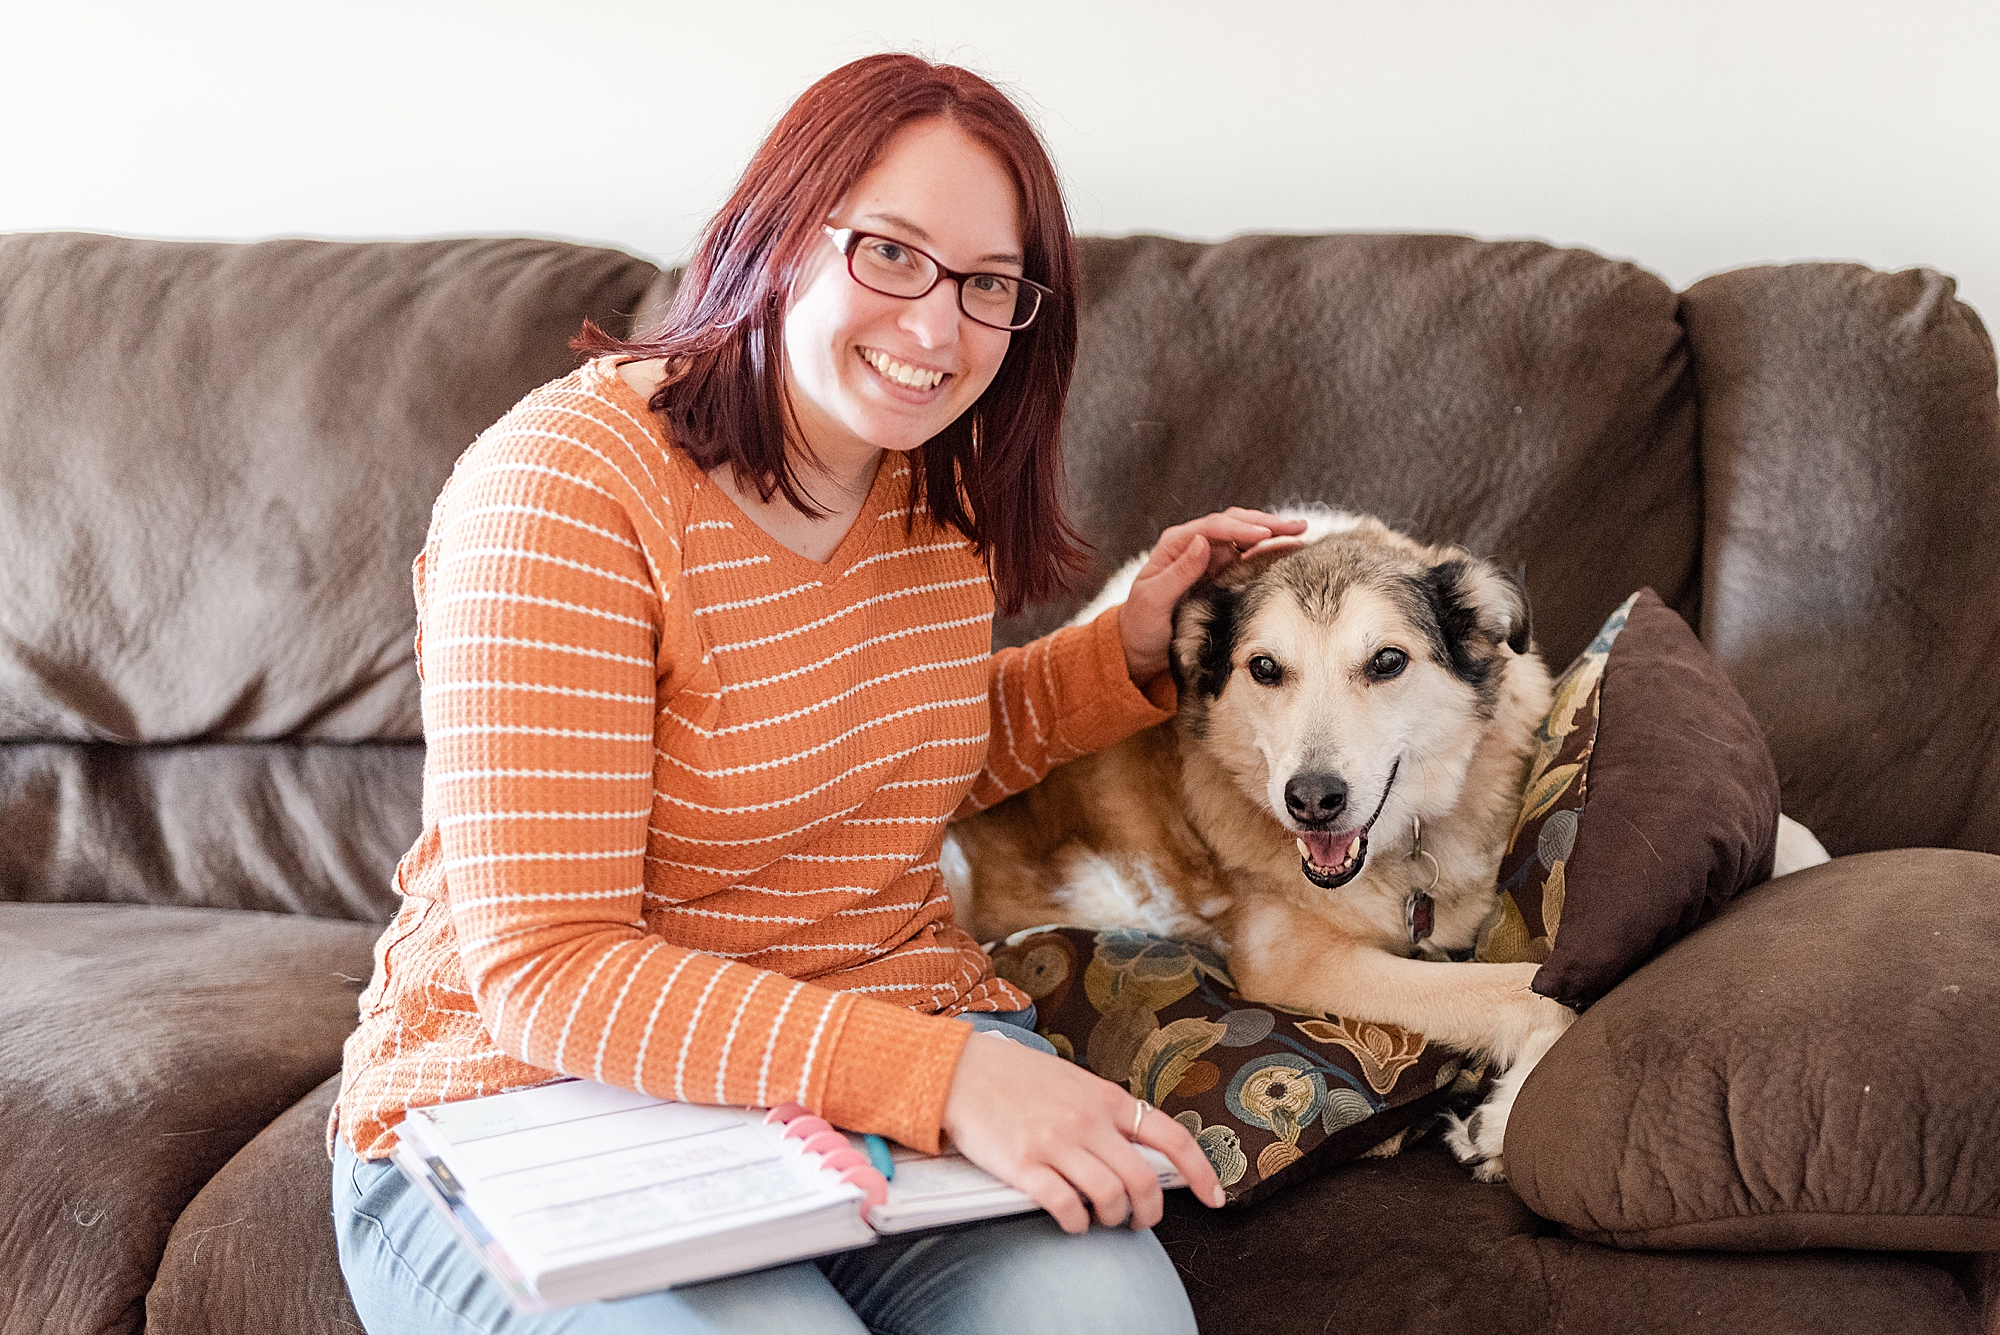 branding portraits at home for virtual assistant with dog on couch